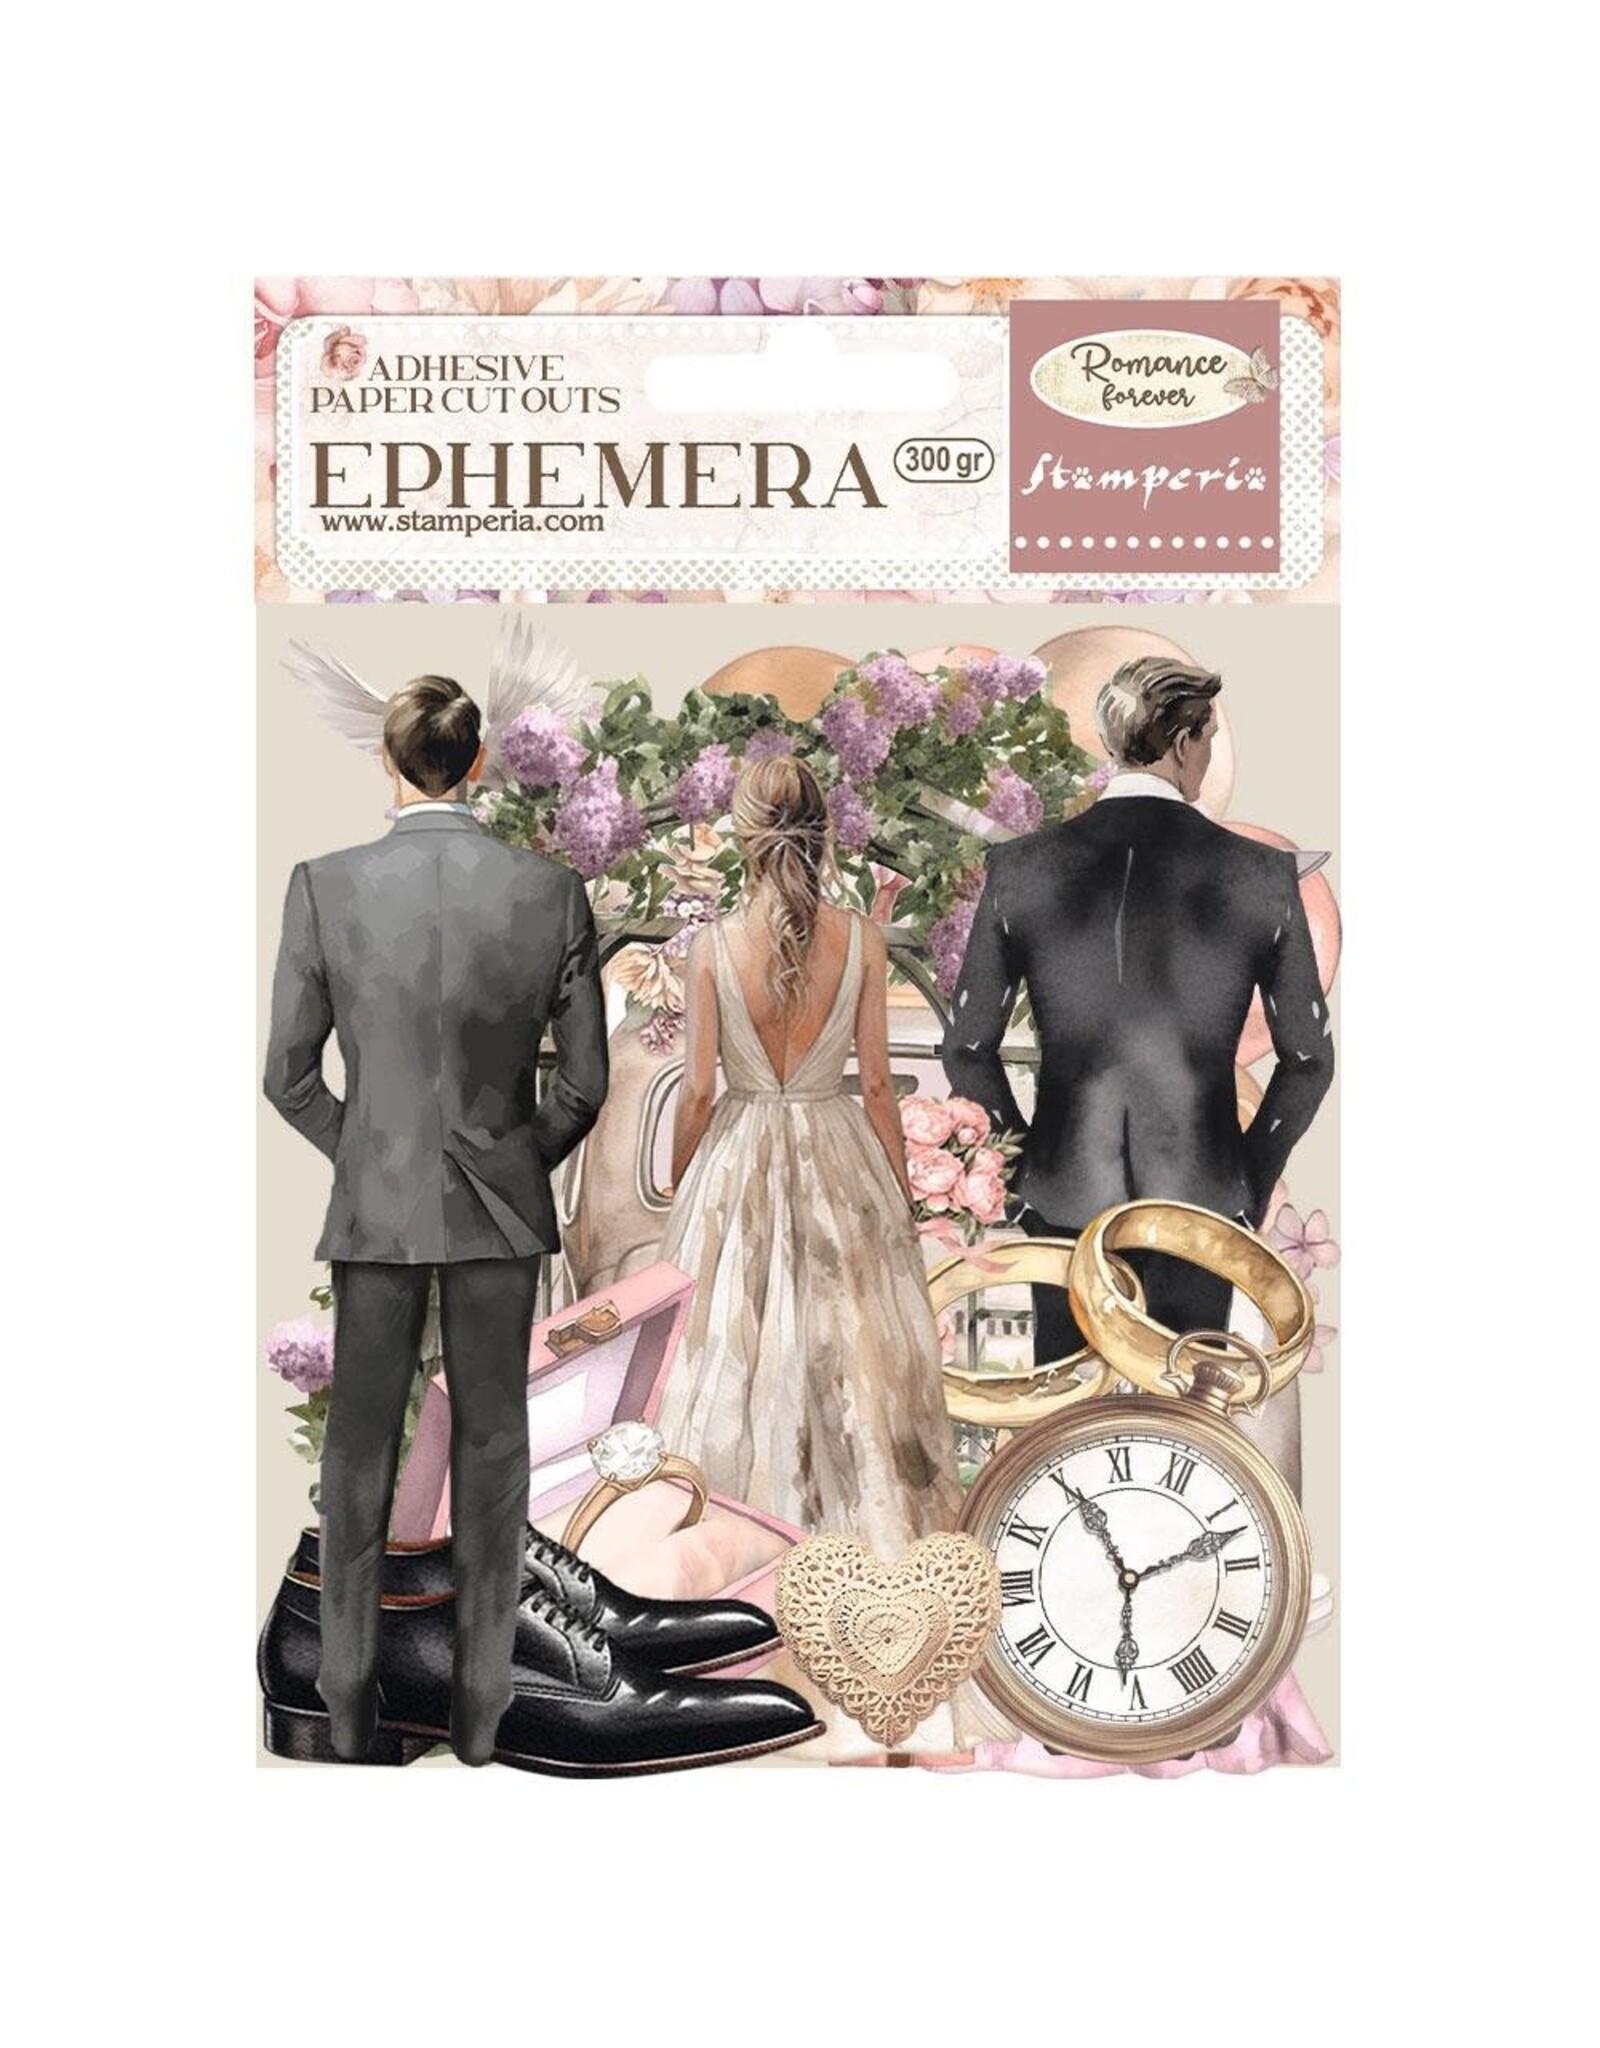 STAMPERIA STAMPERIA ROMANCE FOREVER CEREMONY EDITION ADHESIVE PAPER CUT OUTS